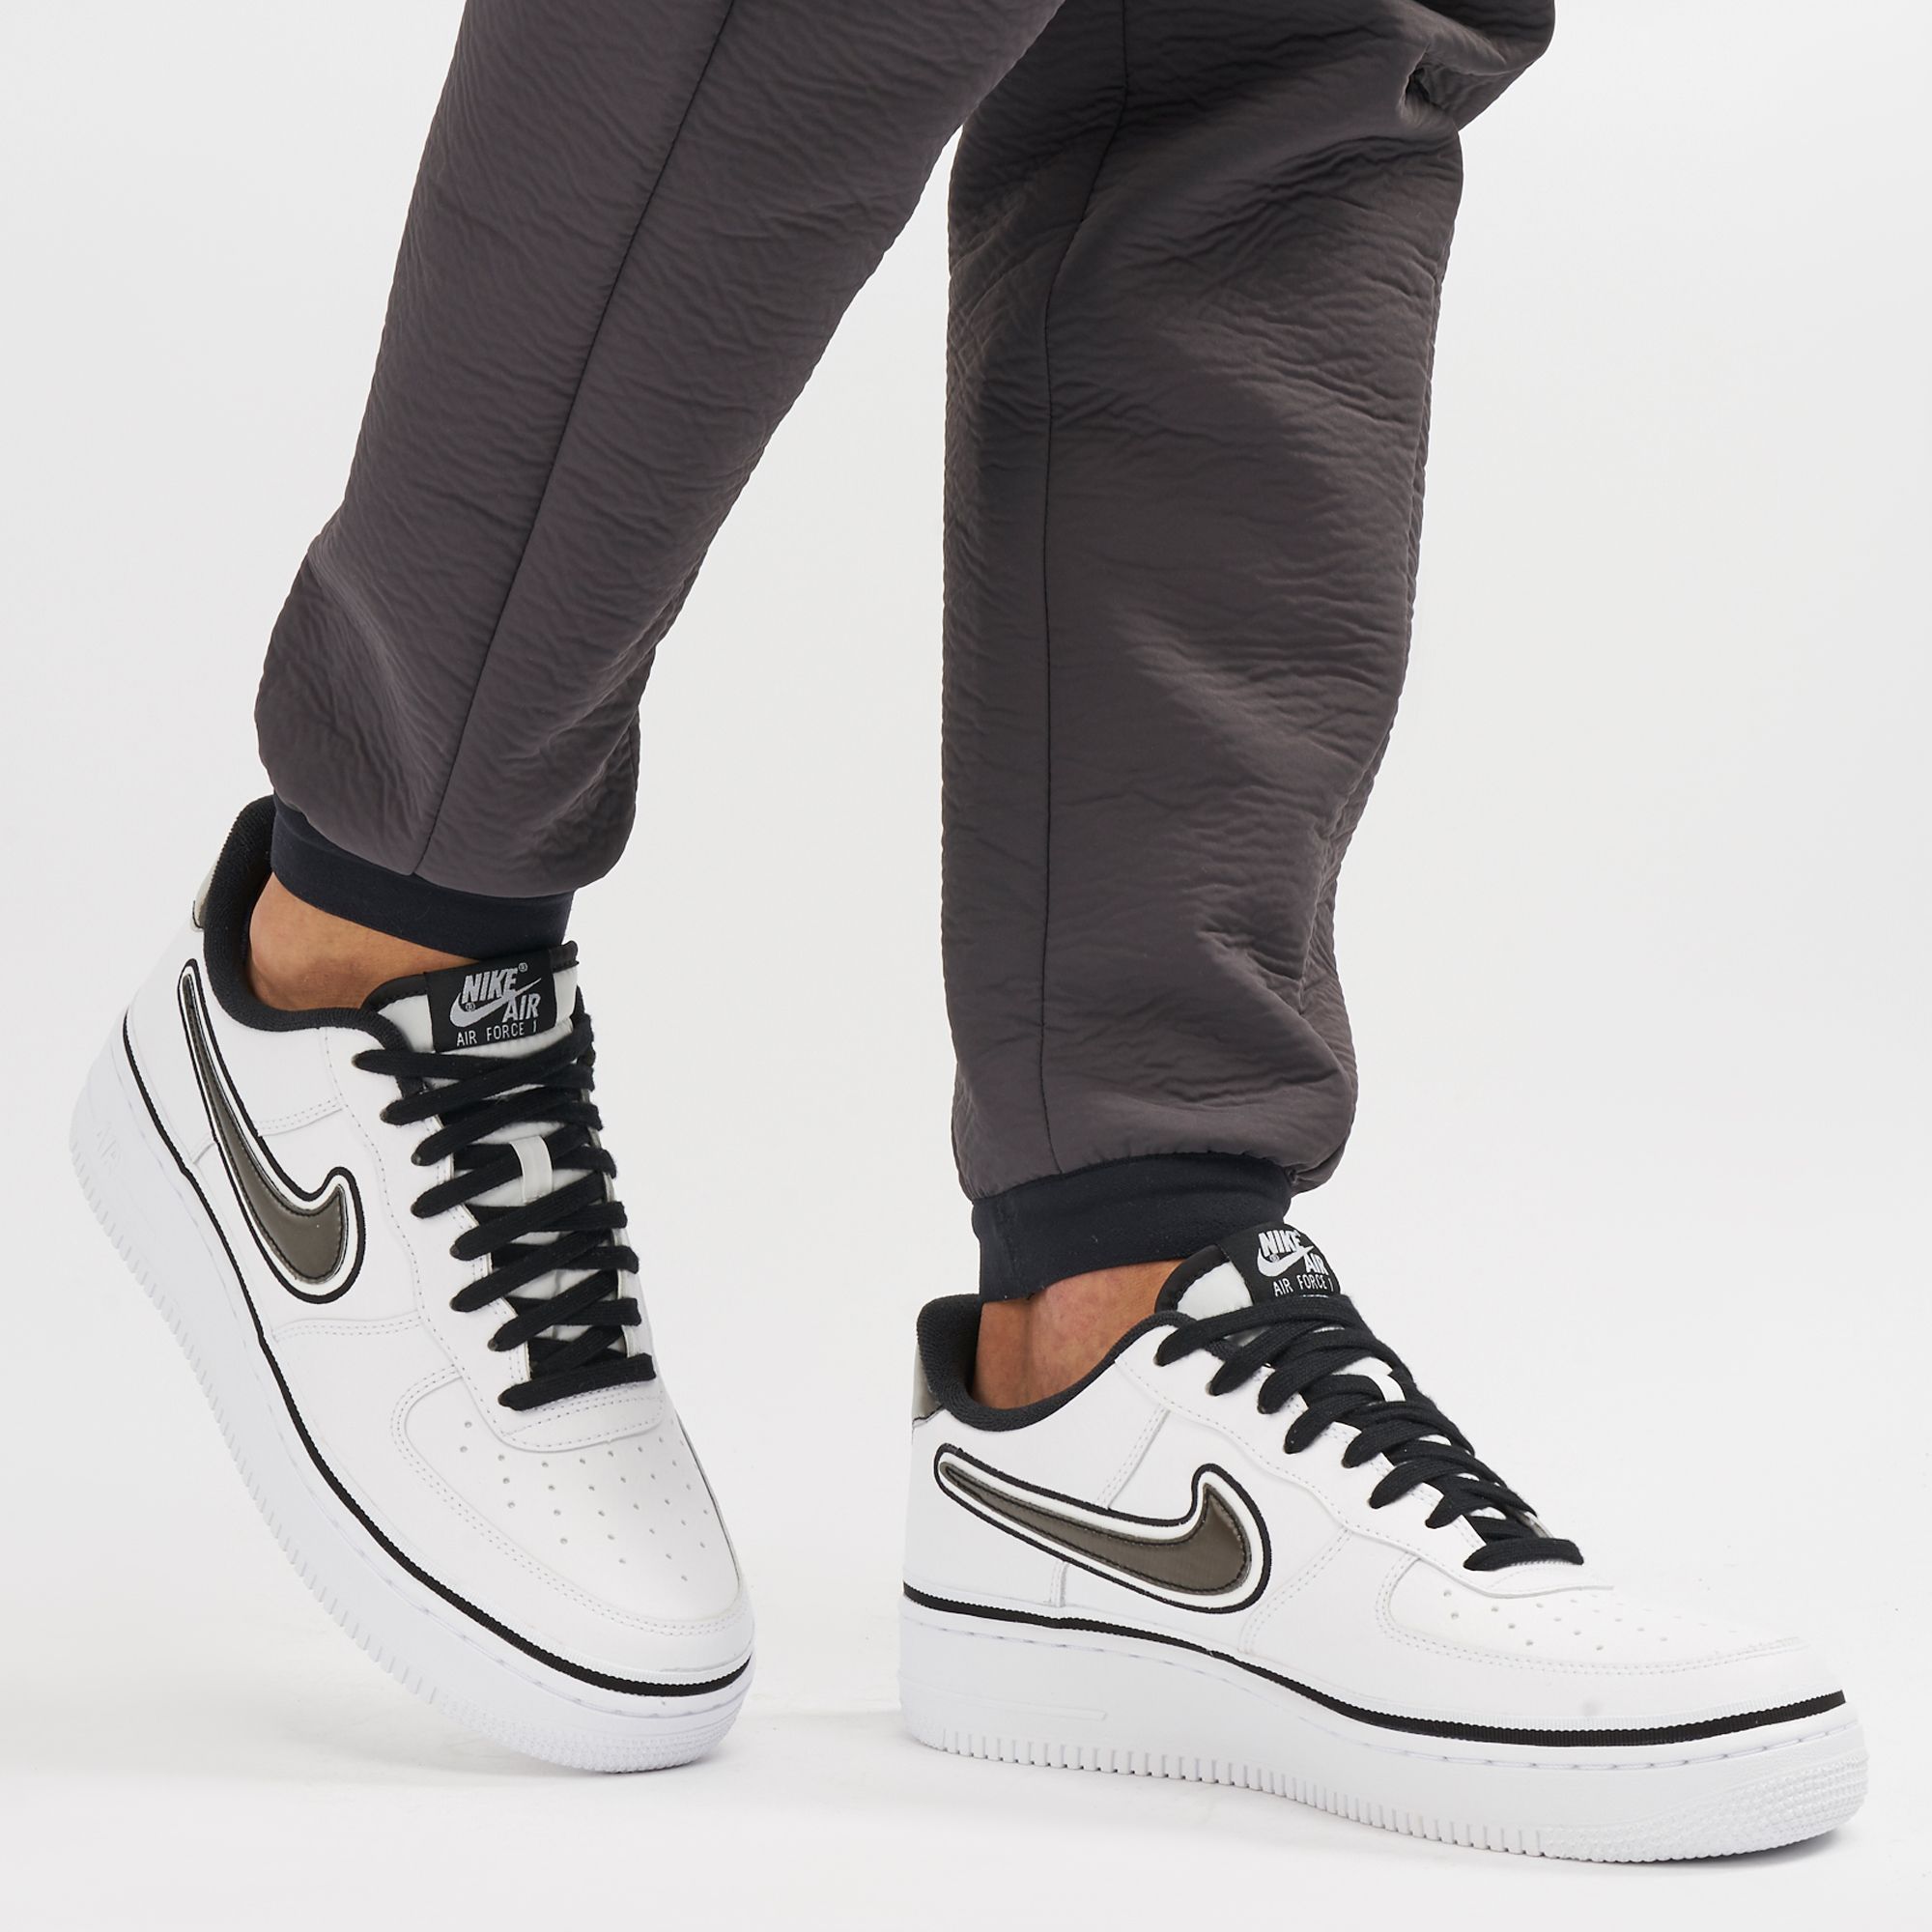 Nike Air Force 1 07 Lv8 Sport Shoe | Sneakers | Shoes | Sports Fashion ...